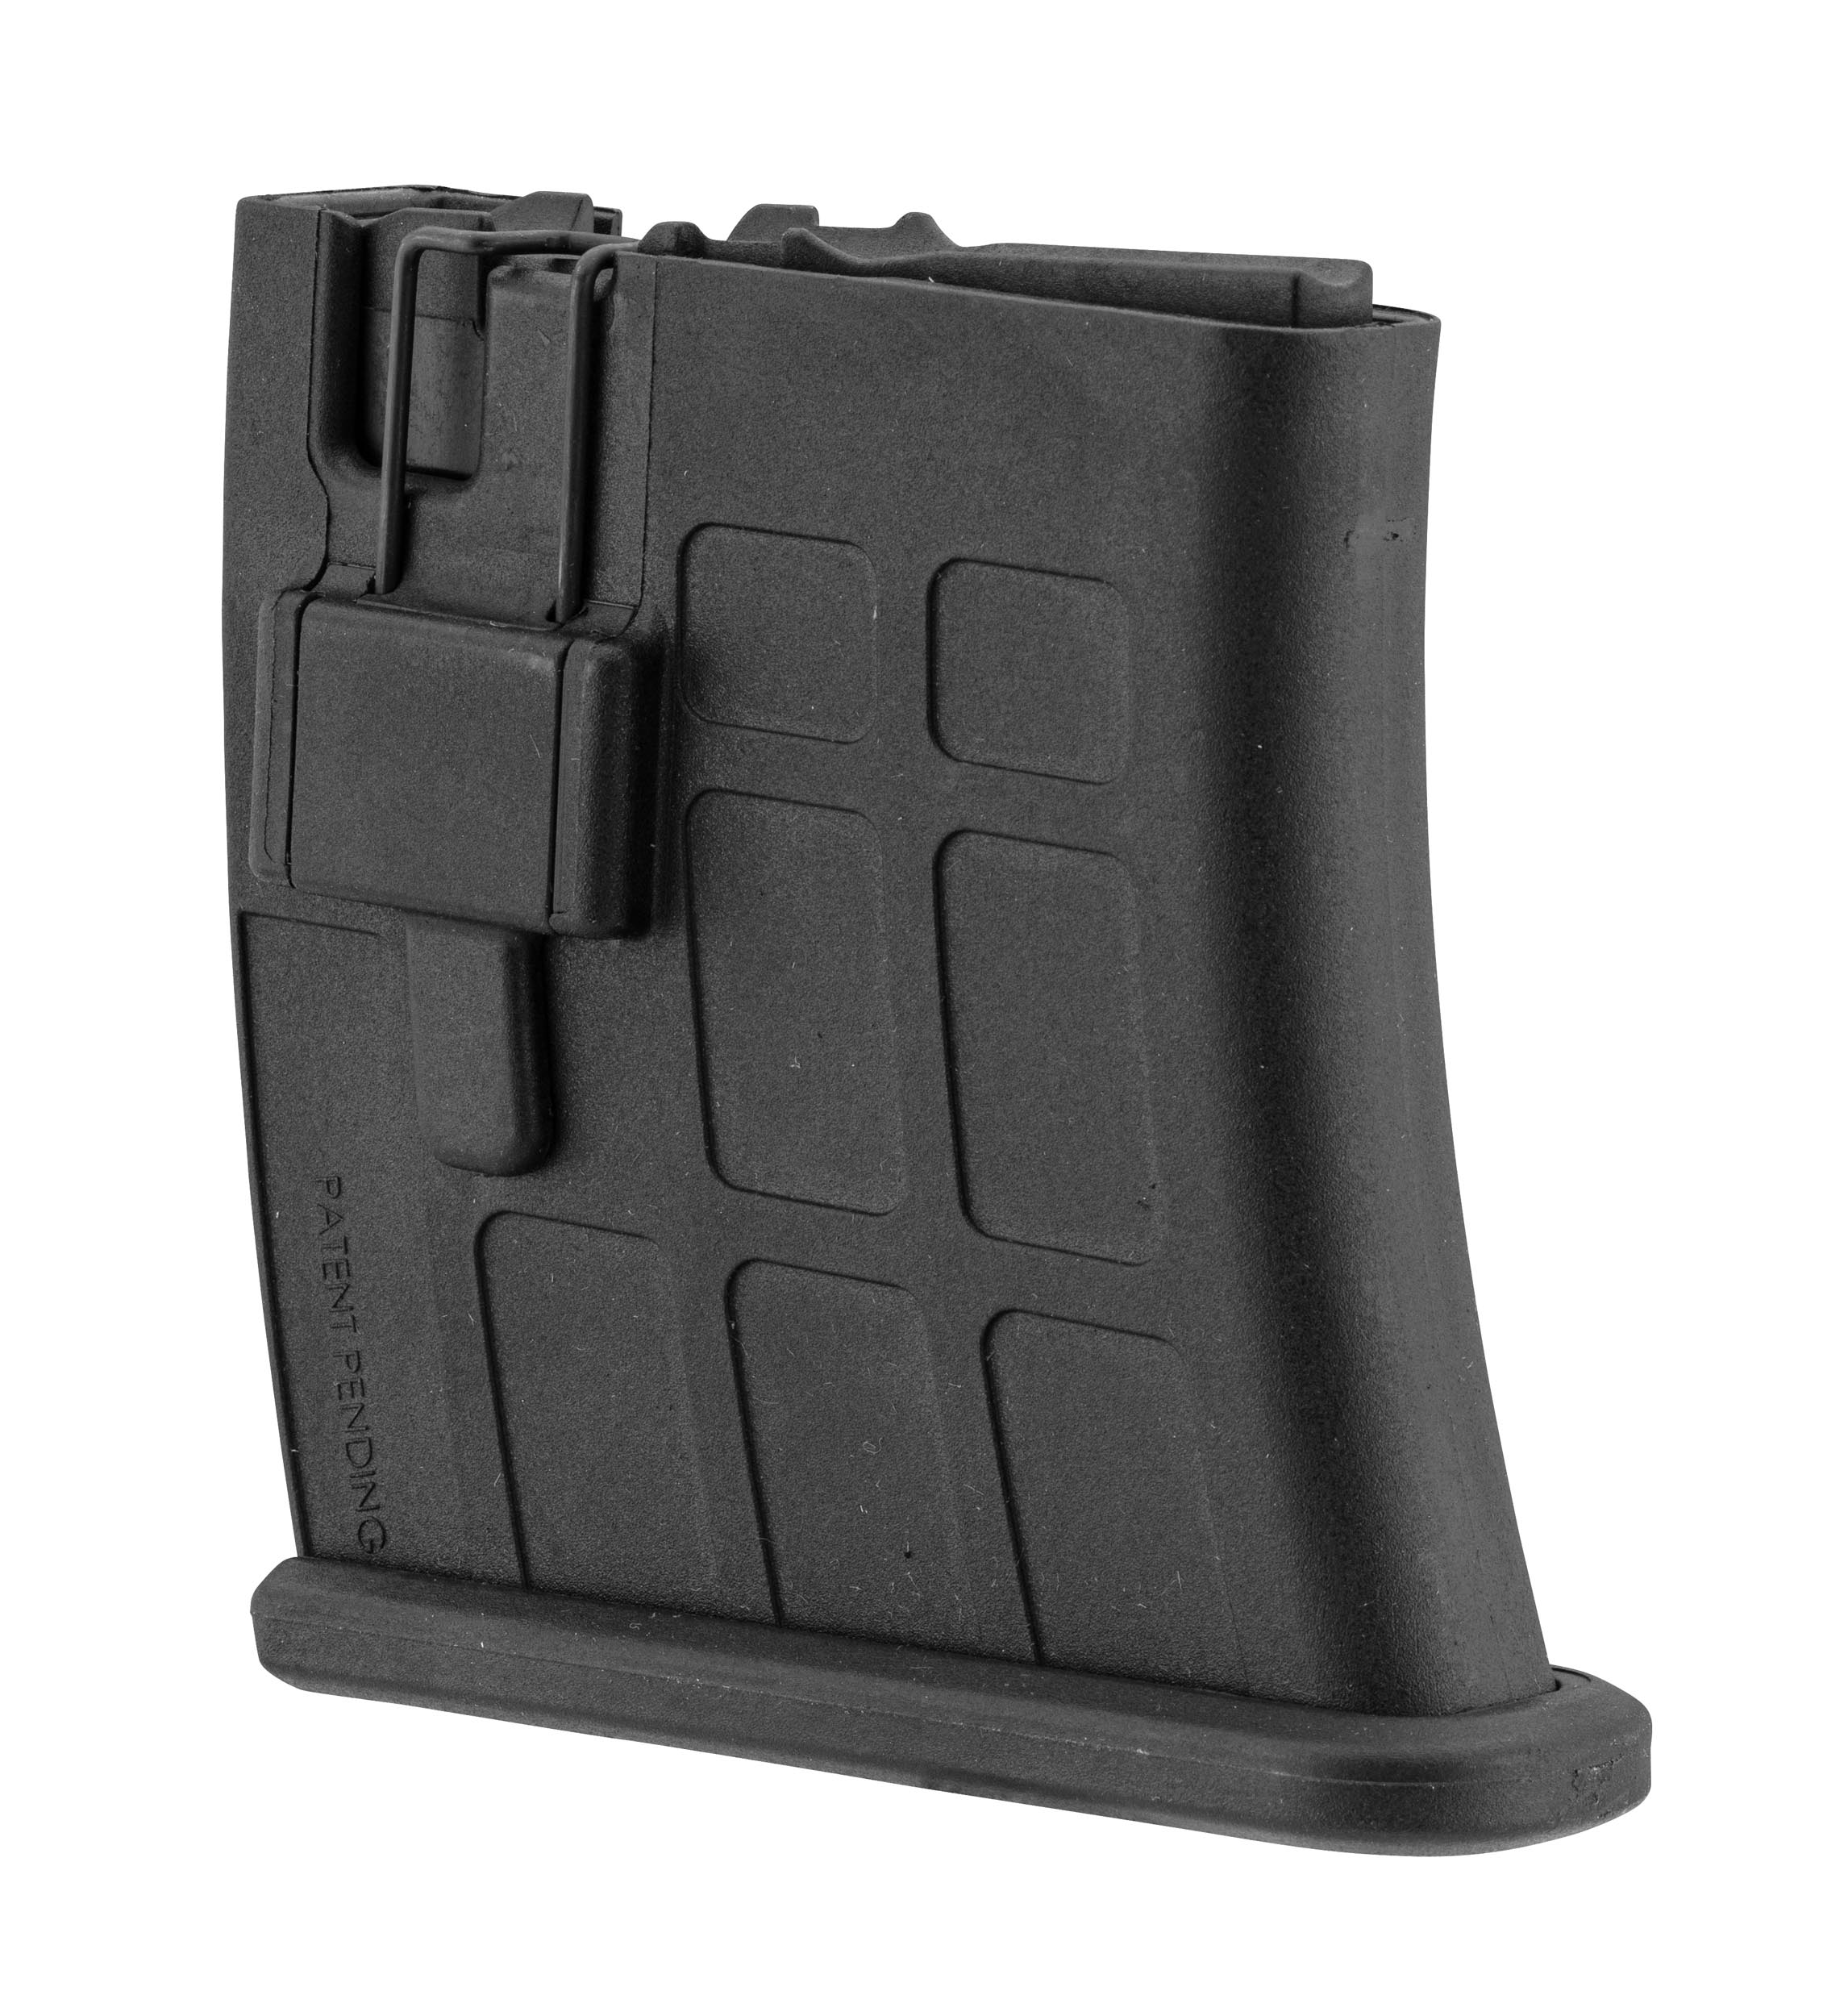 CIVA120-4 Chargeur OPFOR 7.62x54R 5 coups